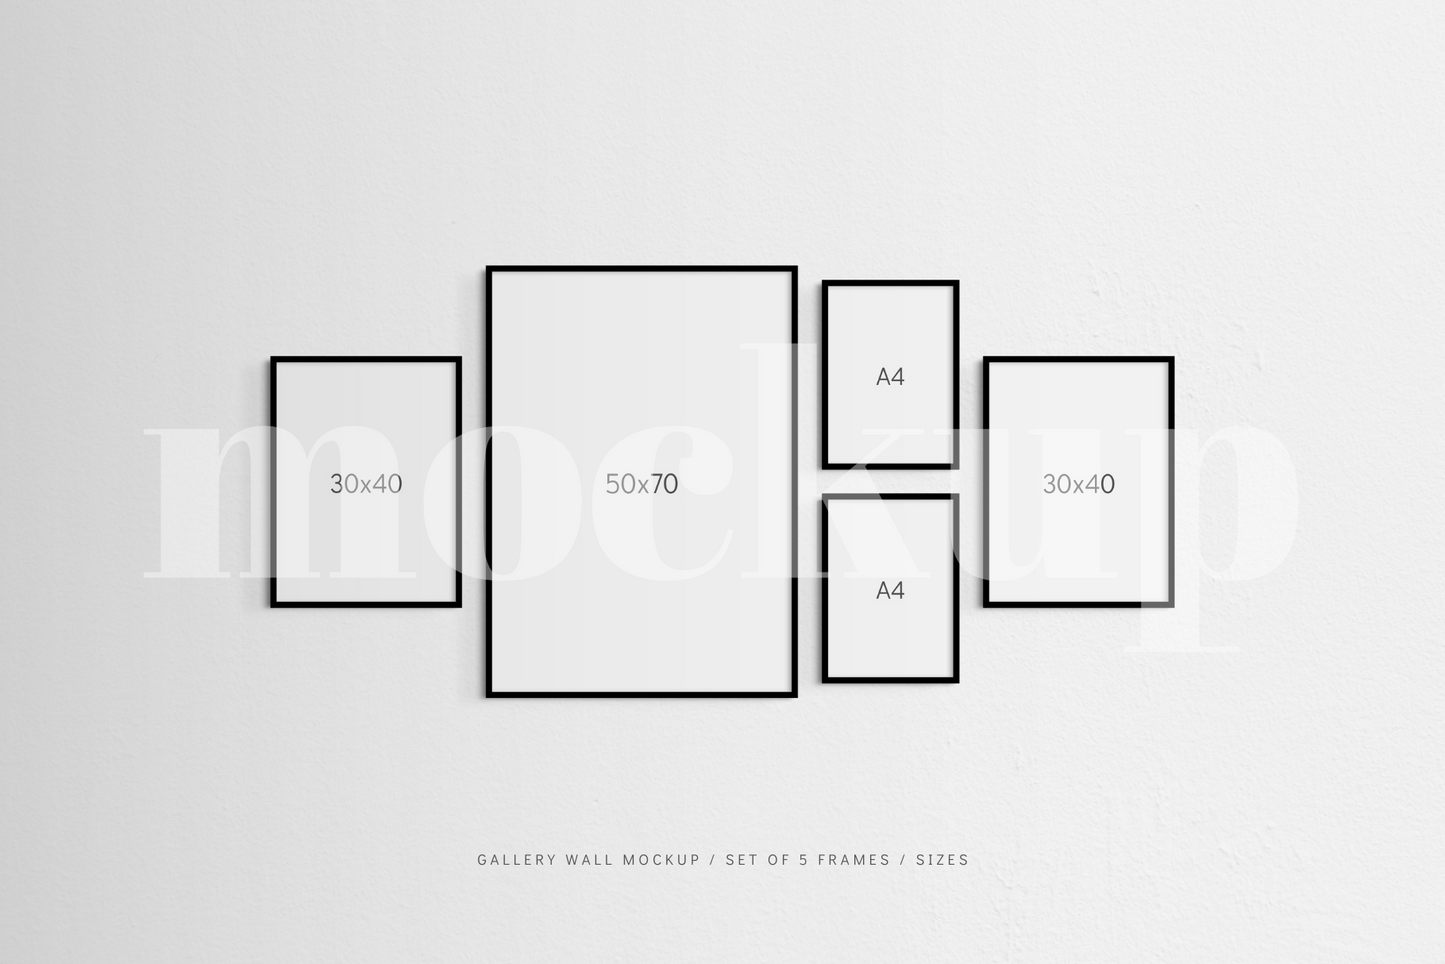 A modern, minimalist gallery wall frame mockup that features a set of 5 vertical black frames.